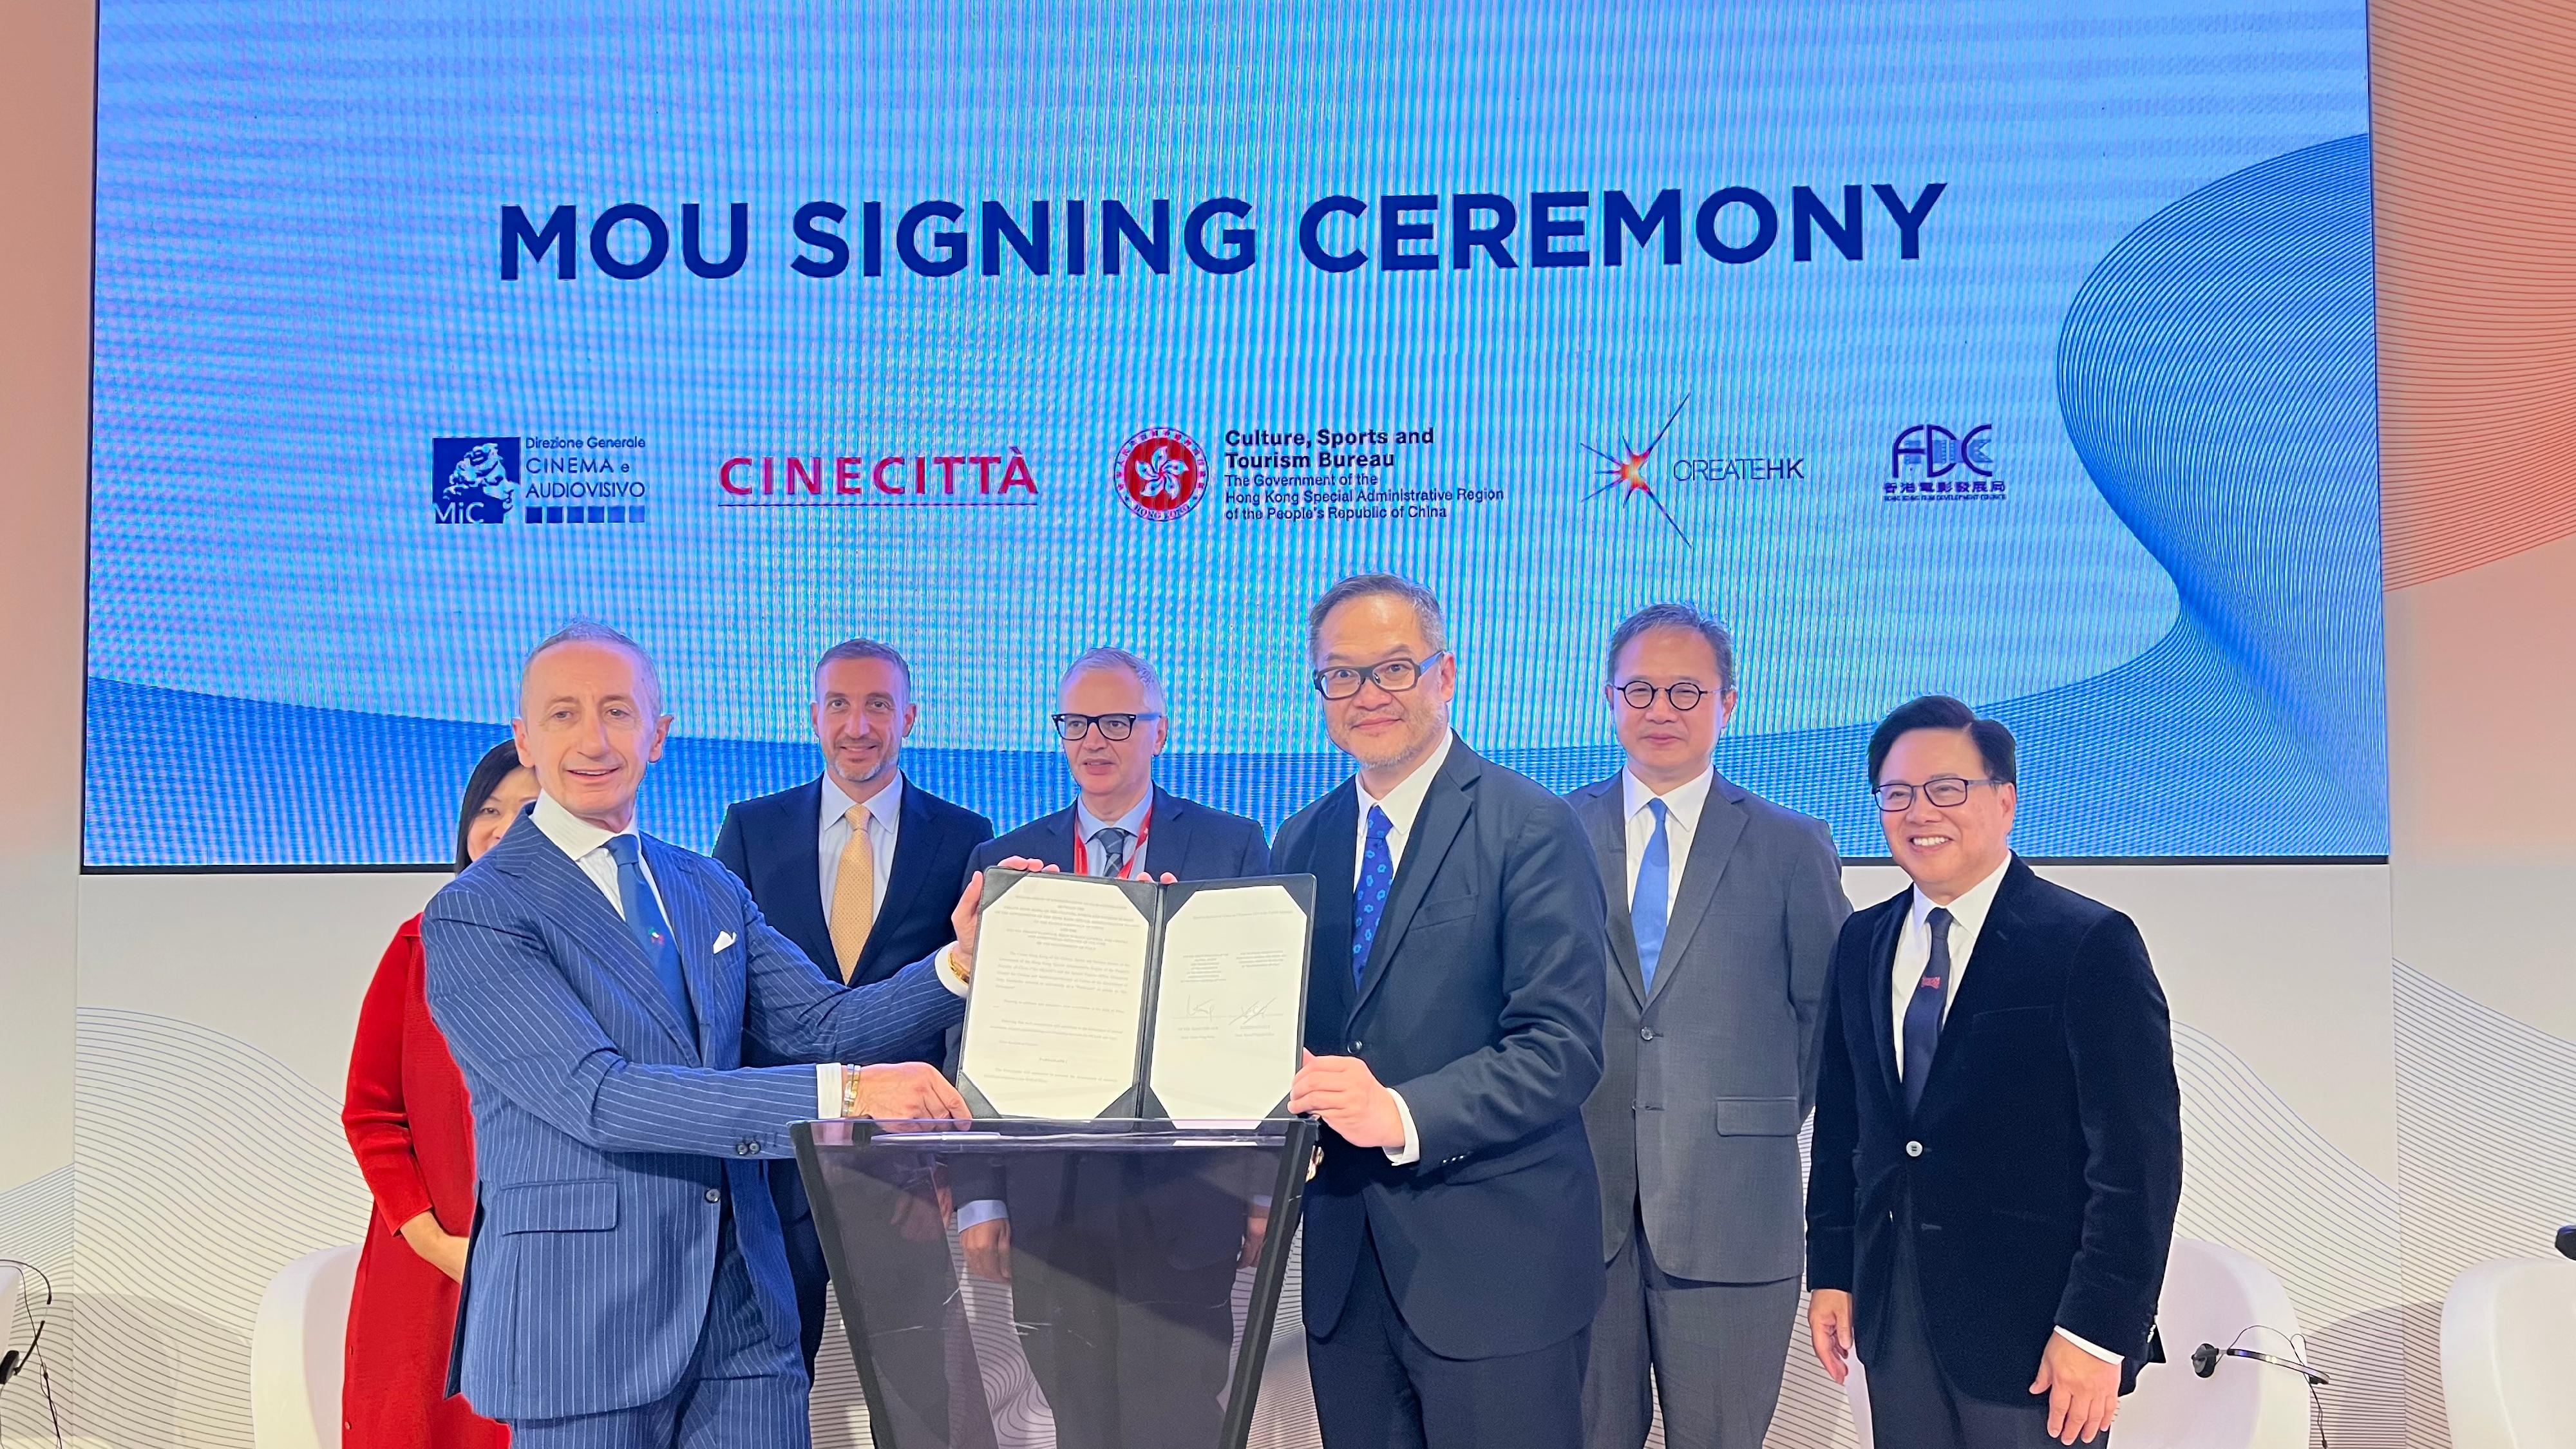 The Permanent Secretary for Culture, Sports and Tourism, Mr Joe Wong (back row, second right), witnessed the signing of Memorandum of Understanding by the Head of Create Hong Kong, Mr Victor Tsang (front row, right), and the Head of Special Projects, Directorate General for Cinema and Audiovisual-Ministry of Culture of the Government of Italy, Mr Roberto Stabile (front row, left), during the 80th Venice International Film Festival on September 2 (Venice time)